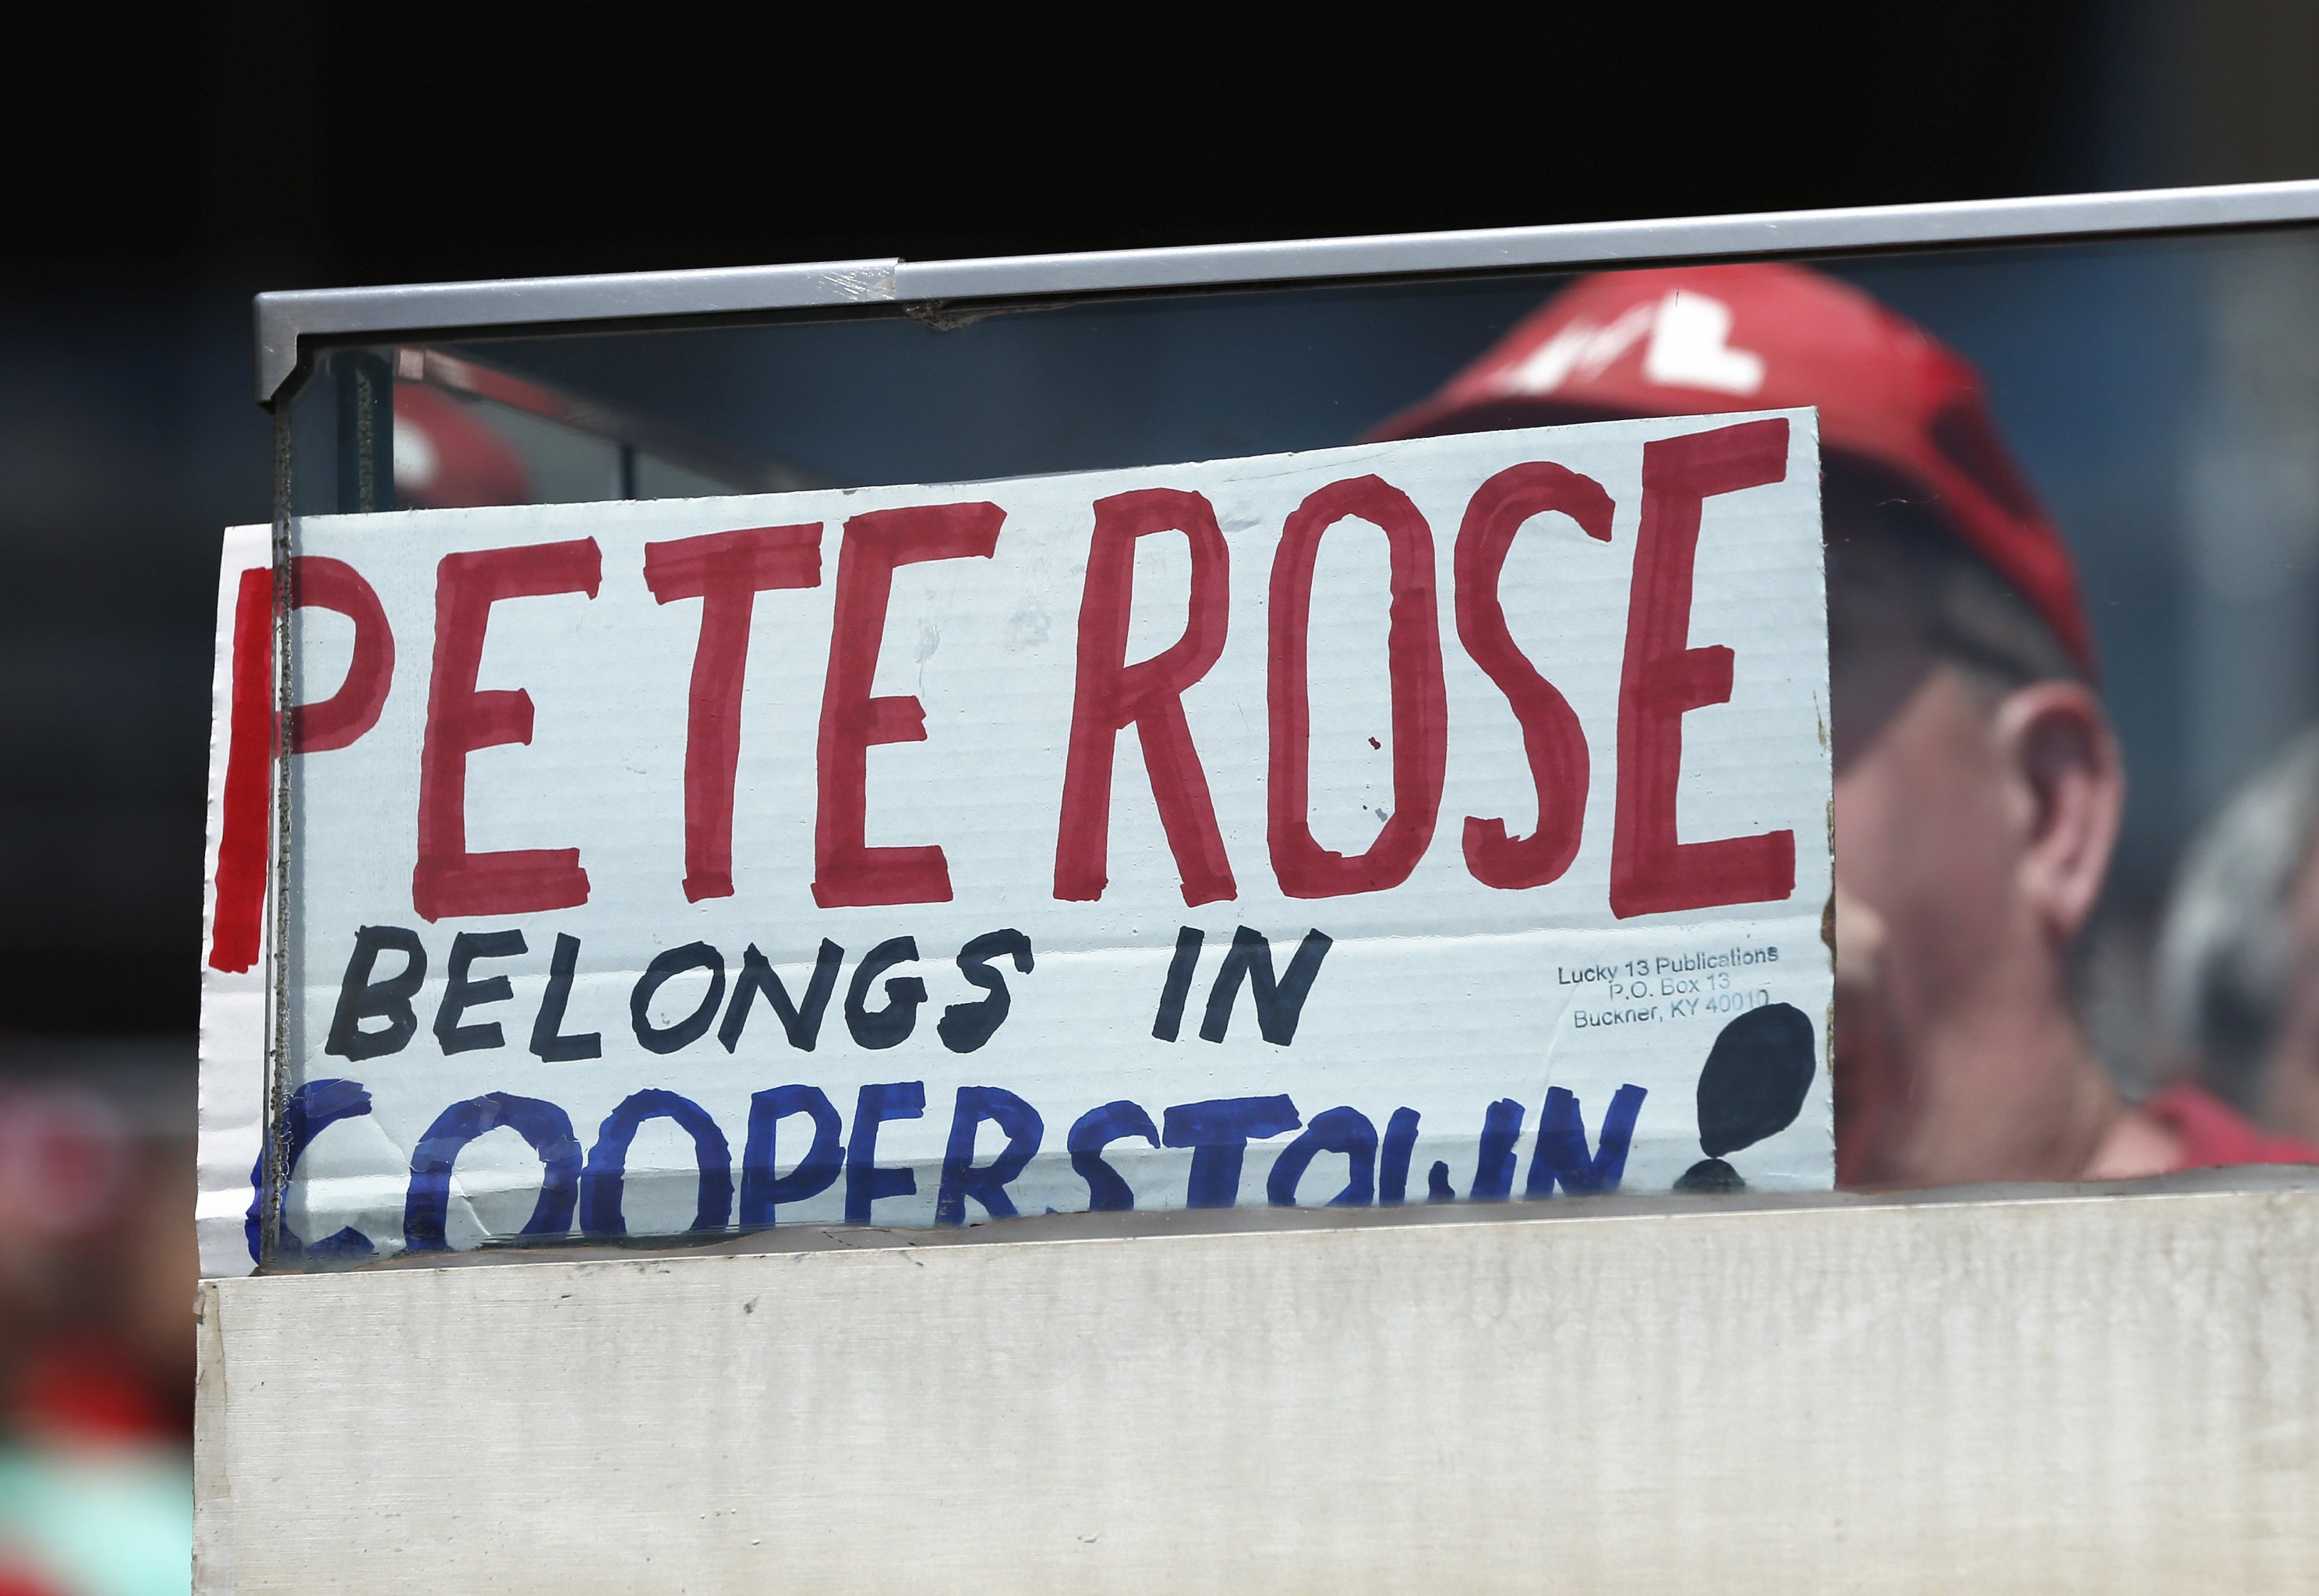 A 6-point plan to Pete Rose's reinstatement